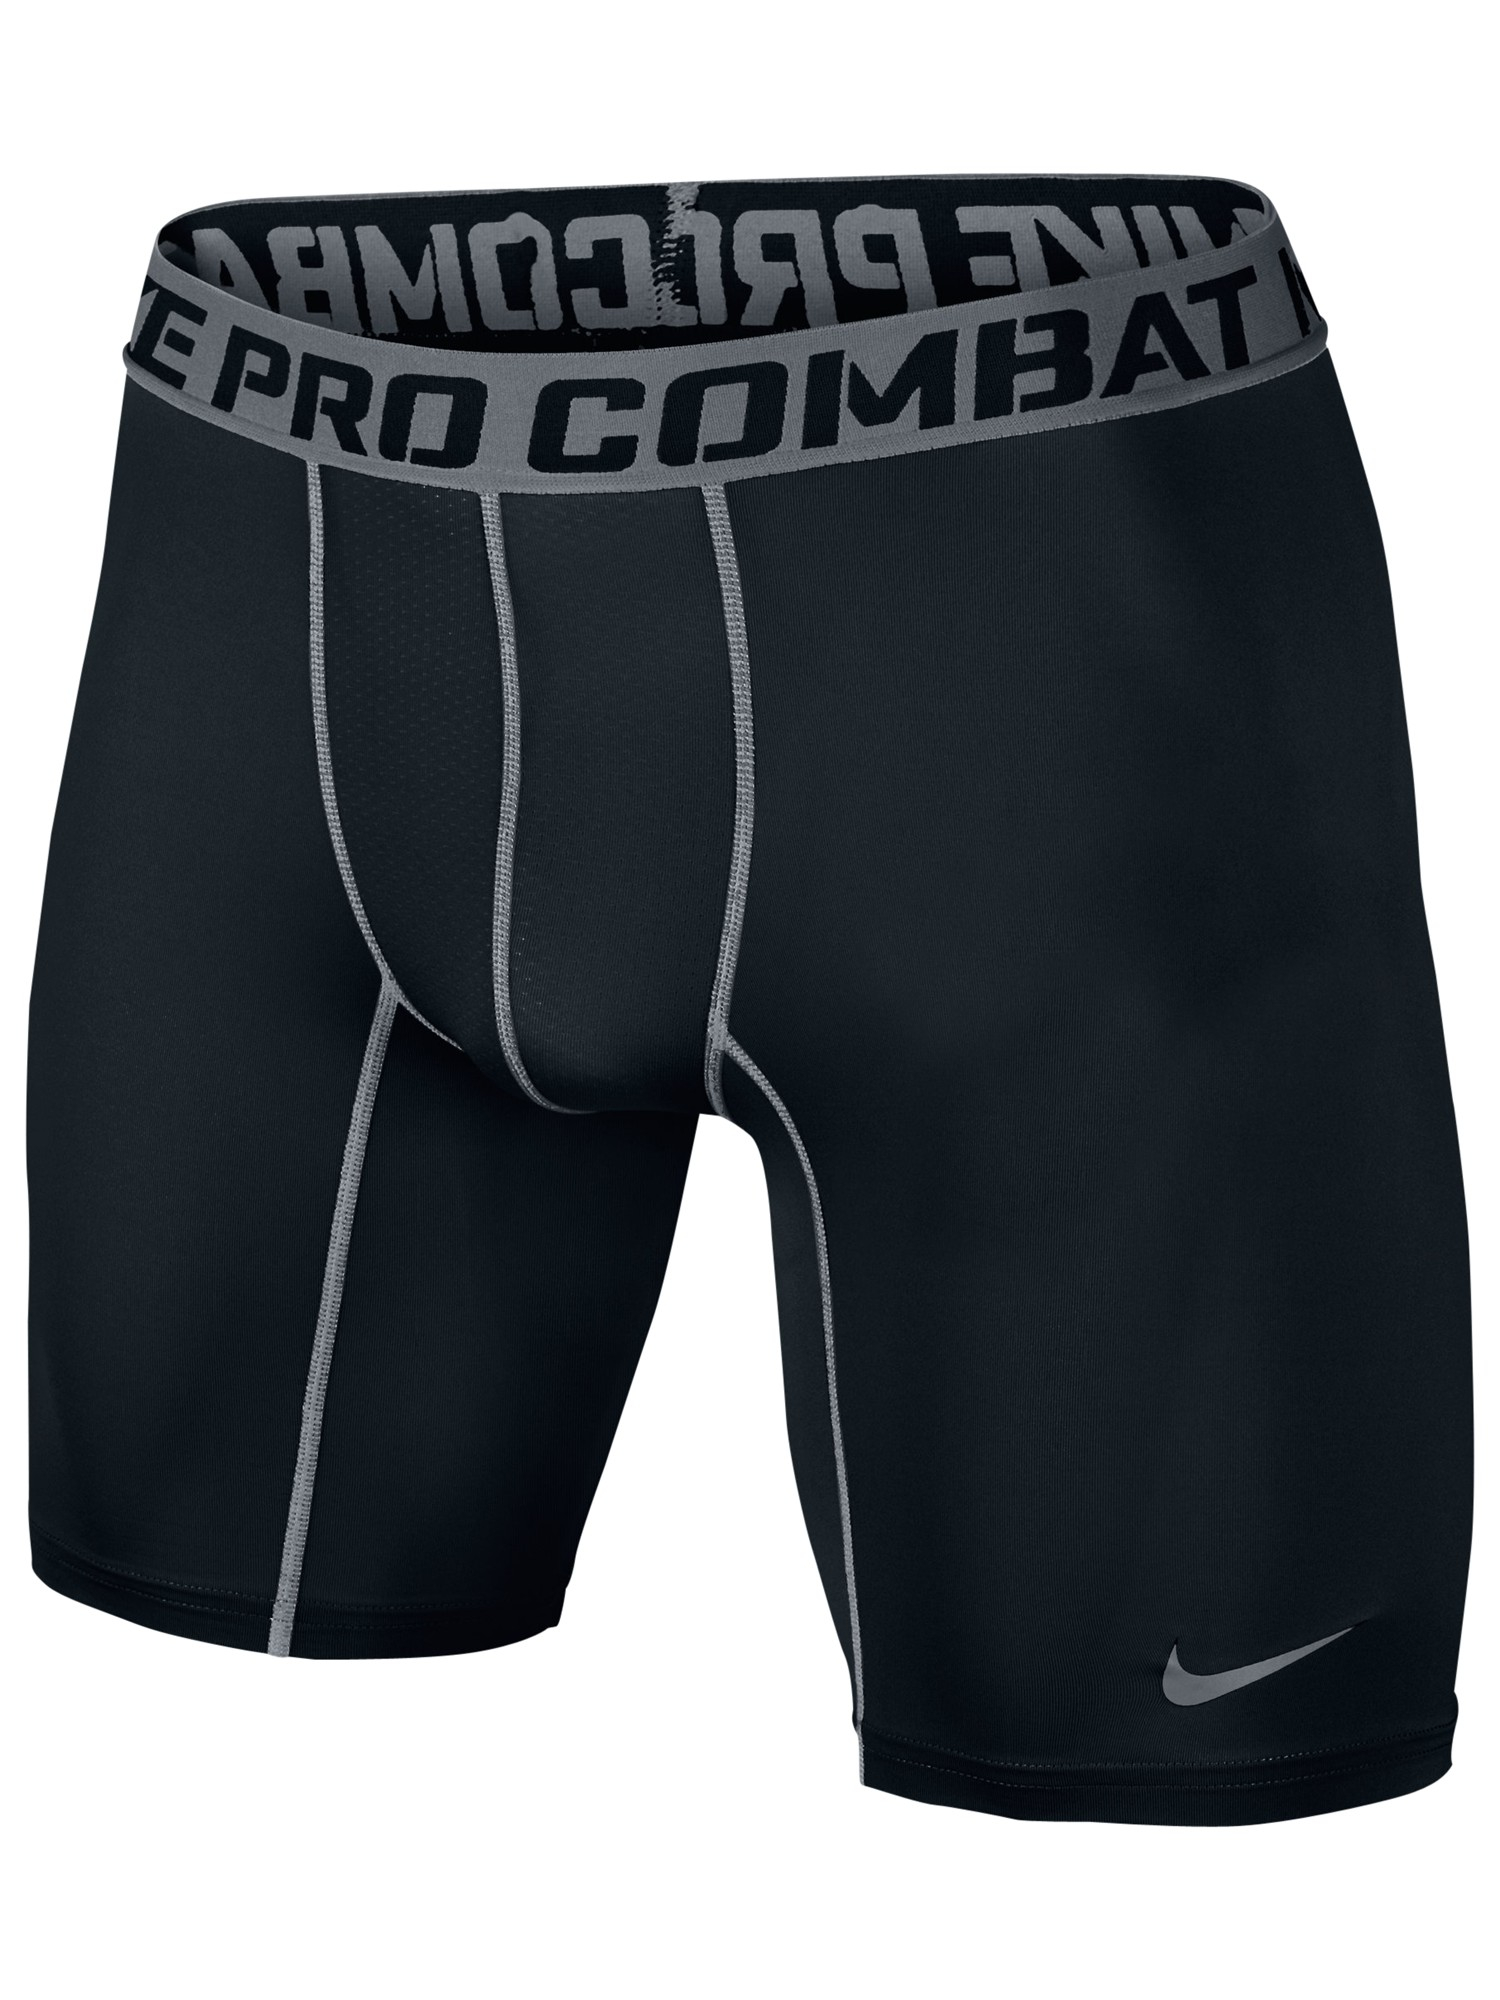 Nike Pro Combat Core Compression 6 Shorts in Black for Men